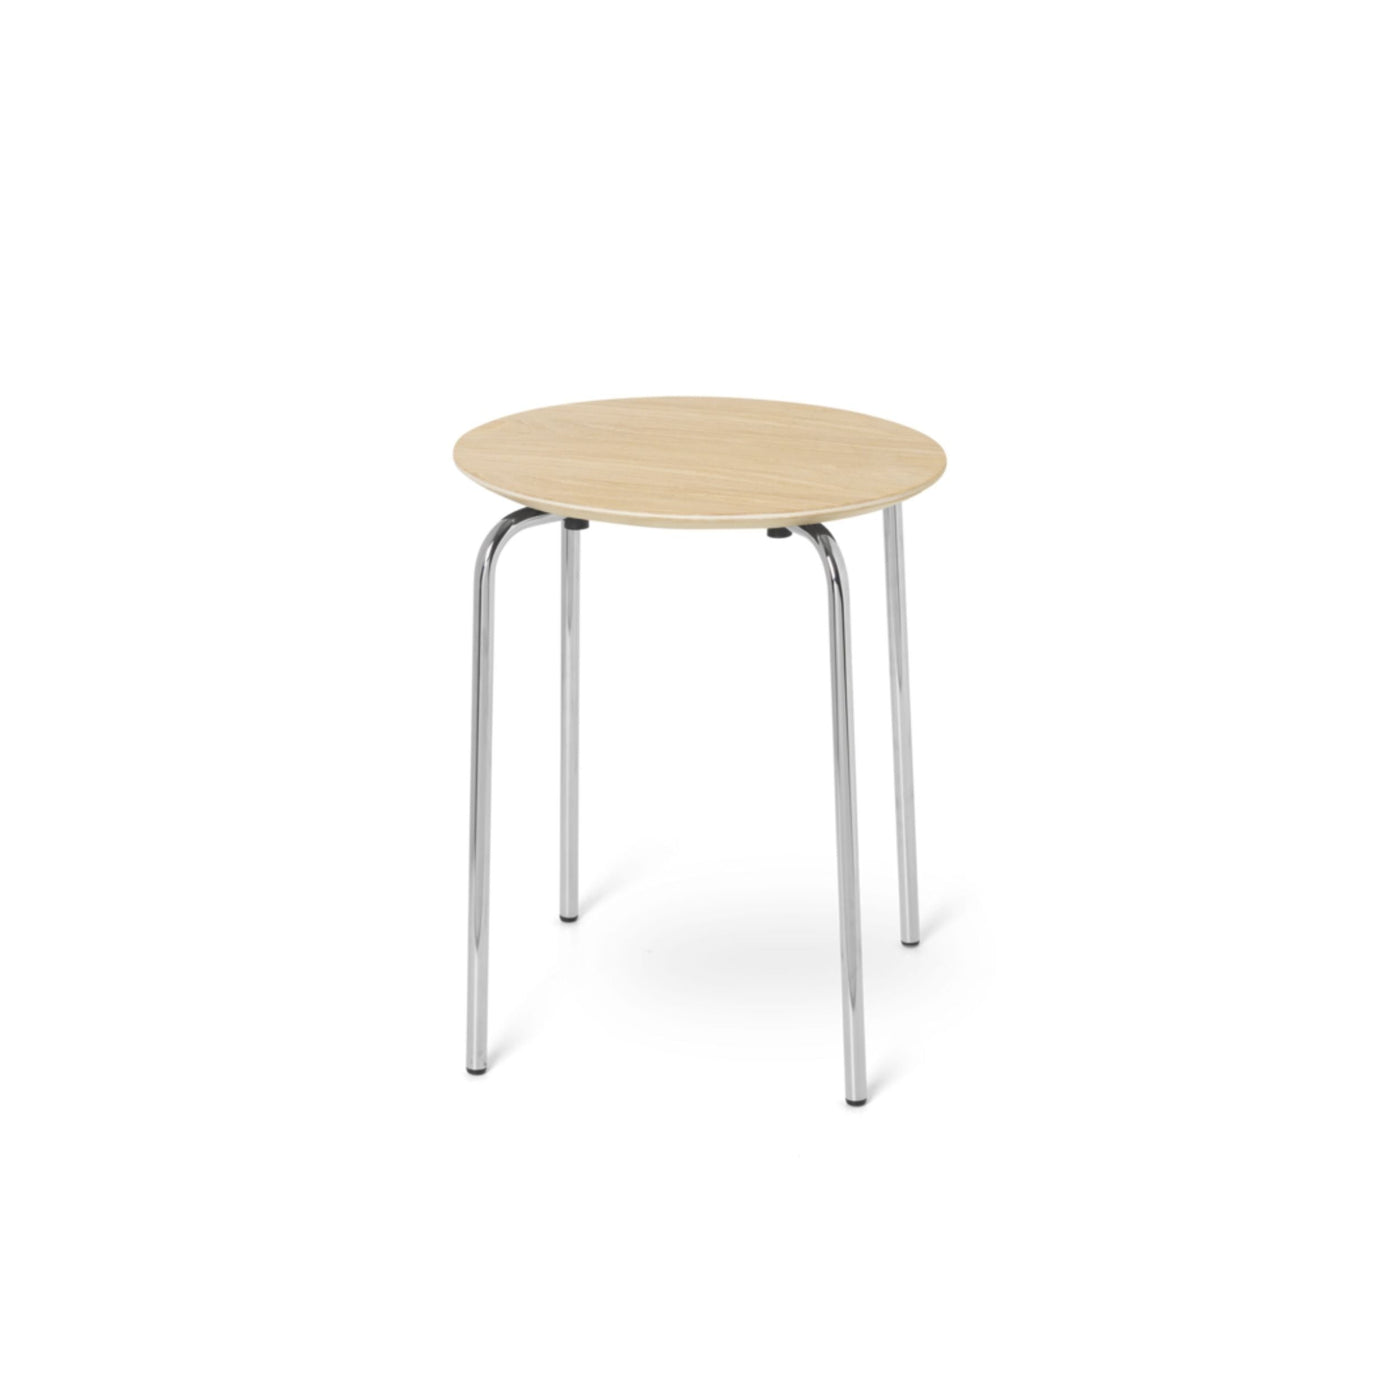 Ferm Living Herman stool with chrome legs. Shop online at someday designs. #colour_white-oiled-oak